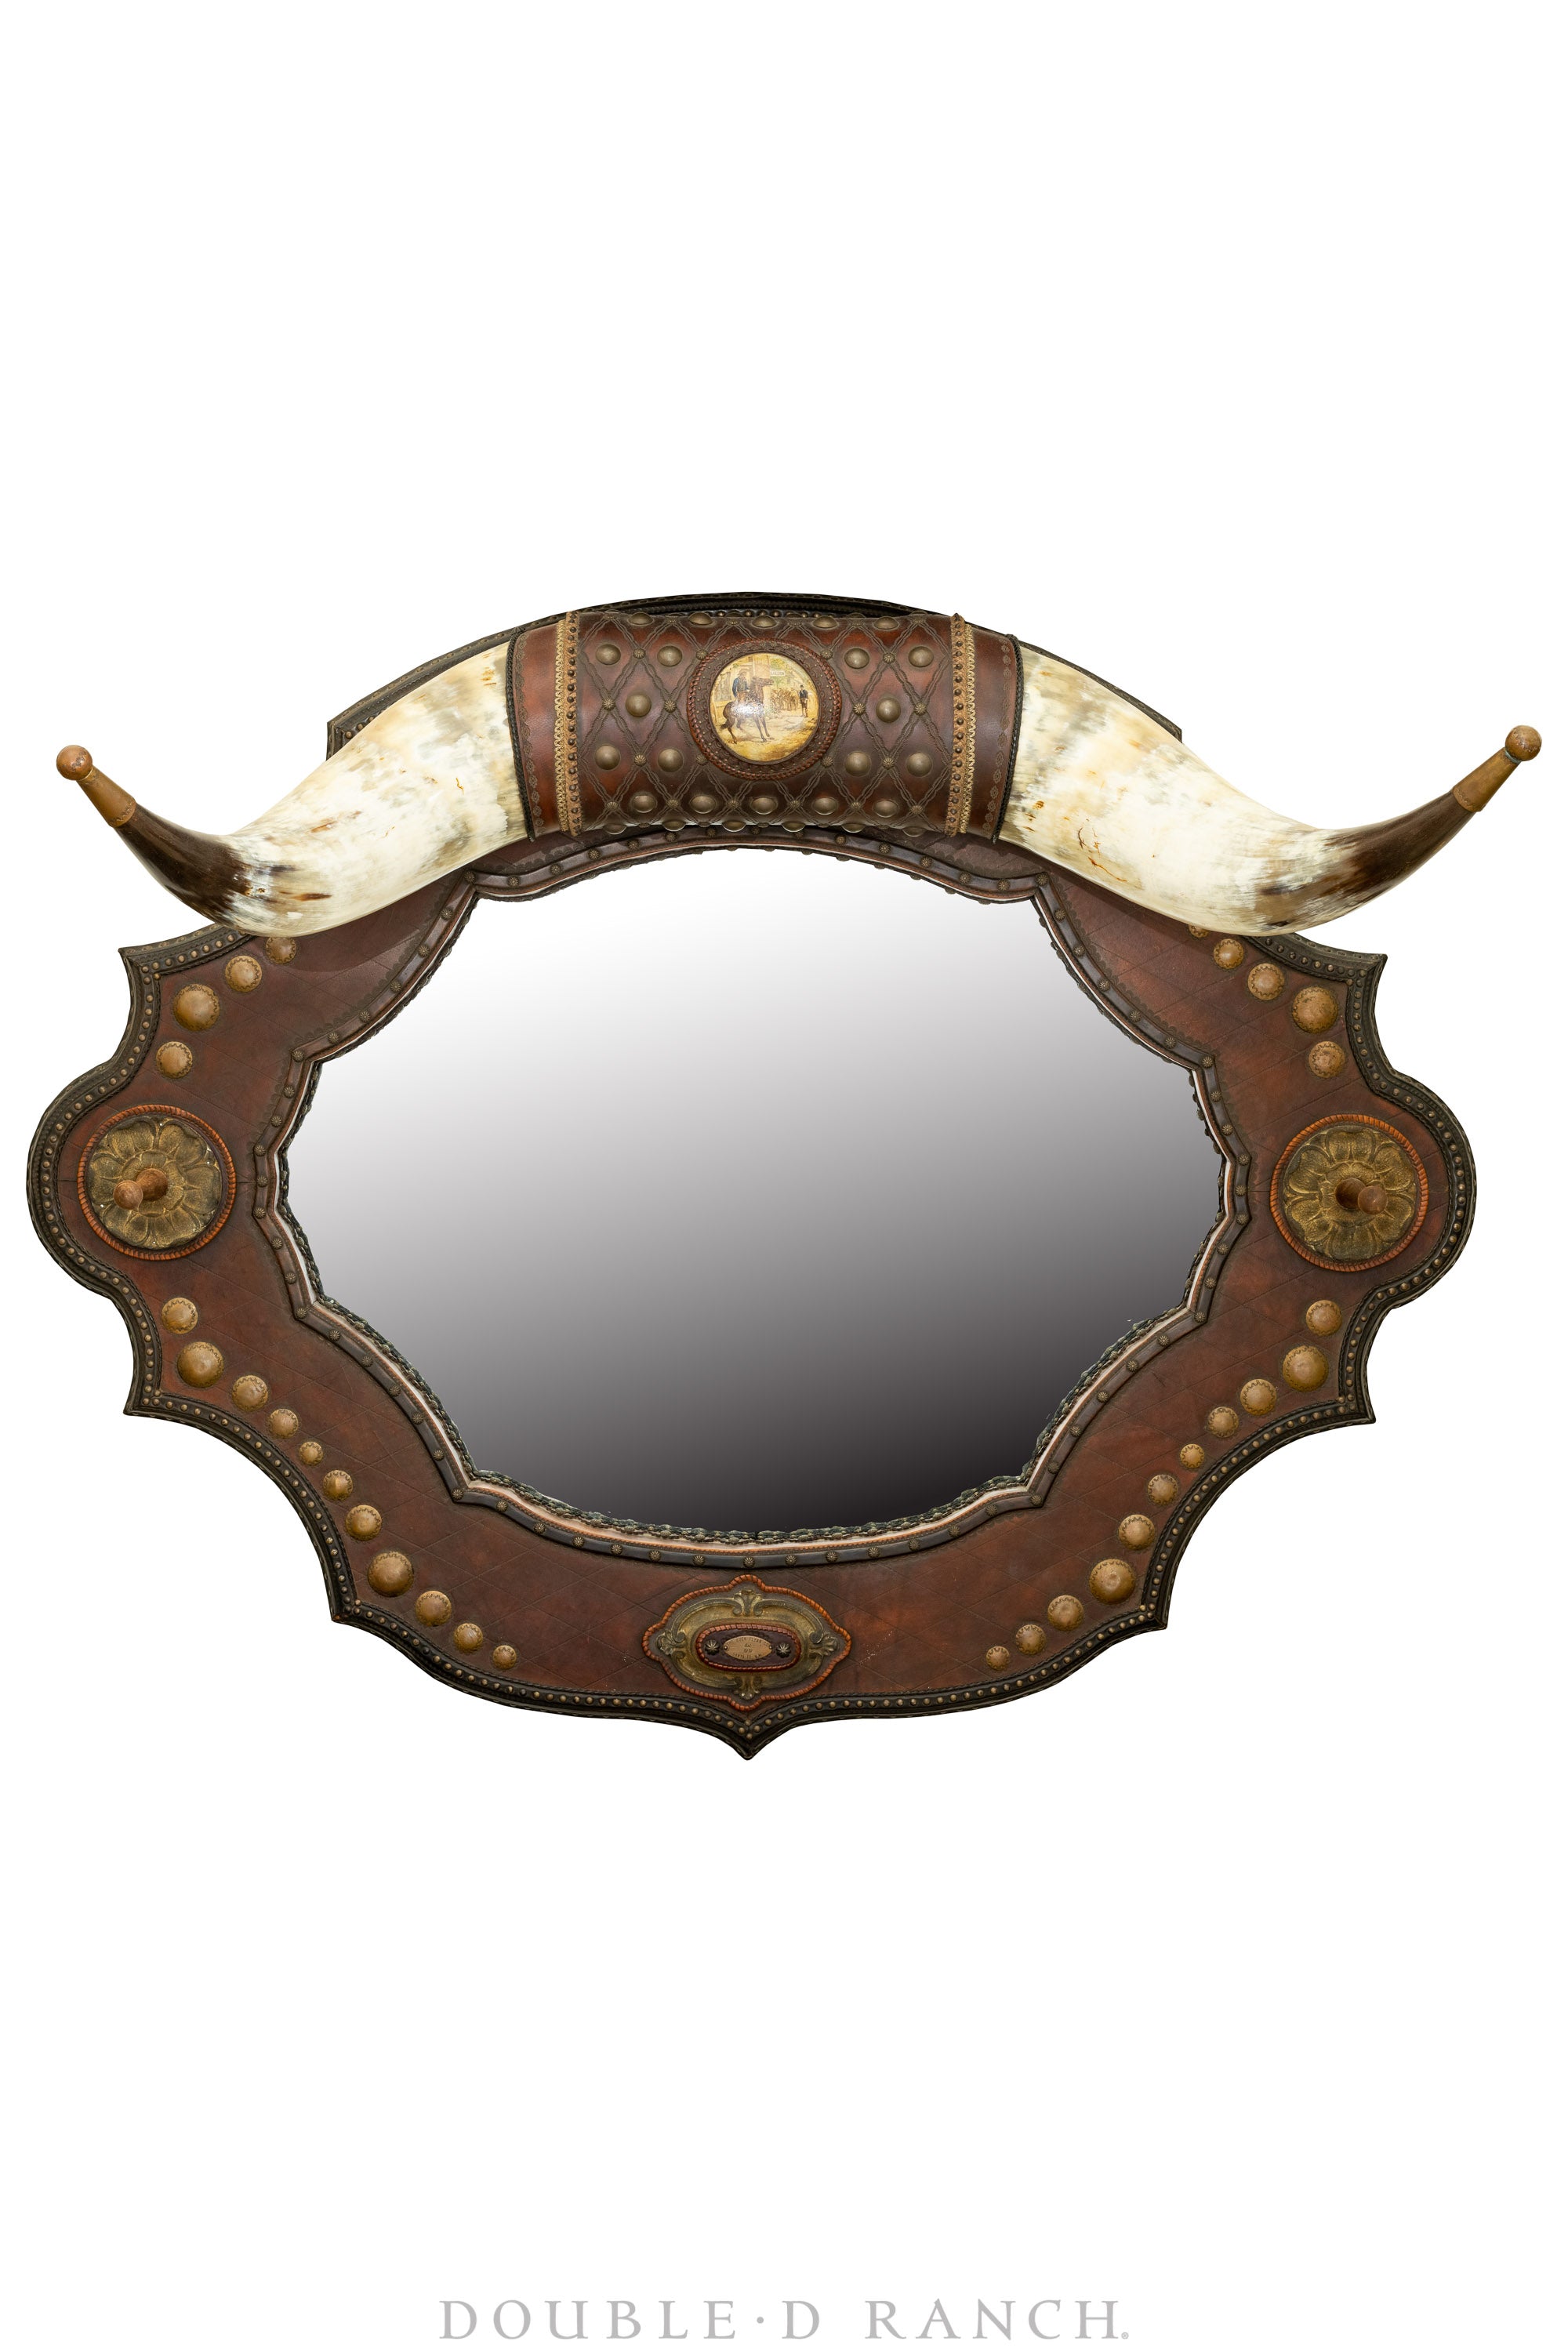 Art, Taxidermy, Saloon Mirror with Longhorns, Leather Tooling and Brass Nails, Buck Flynn Company of Santa Fe, Vintage ‘90s, 1066